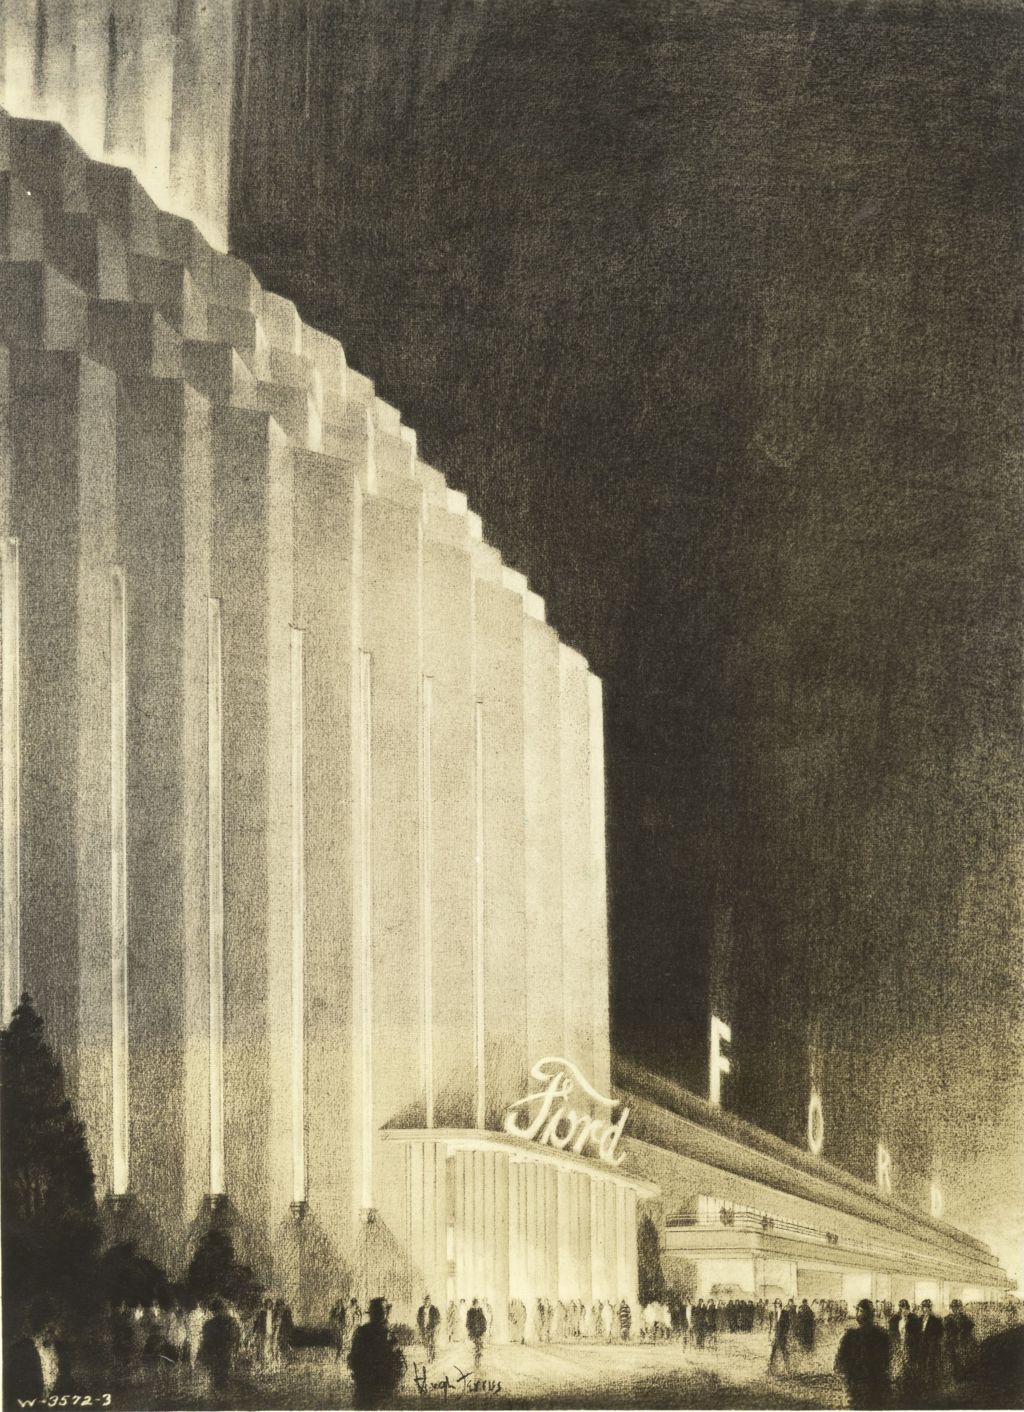 Miniature of Conception by Hugh Ferriss of how the Ford Exhibition building will look at night